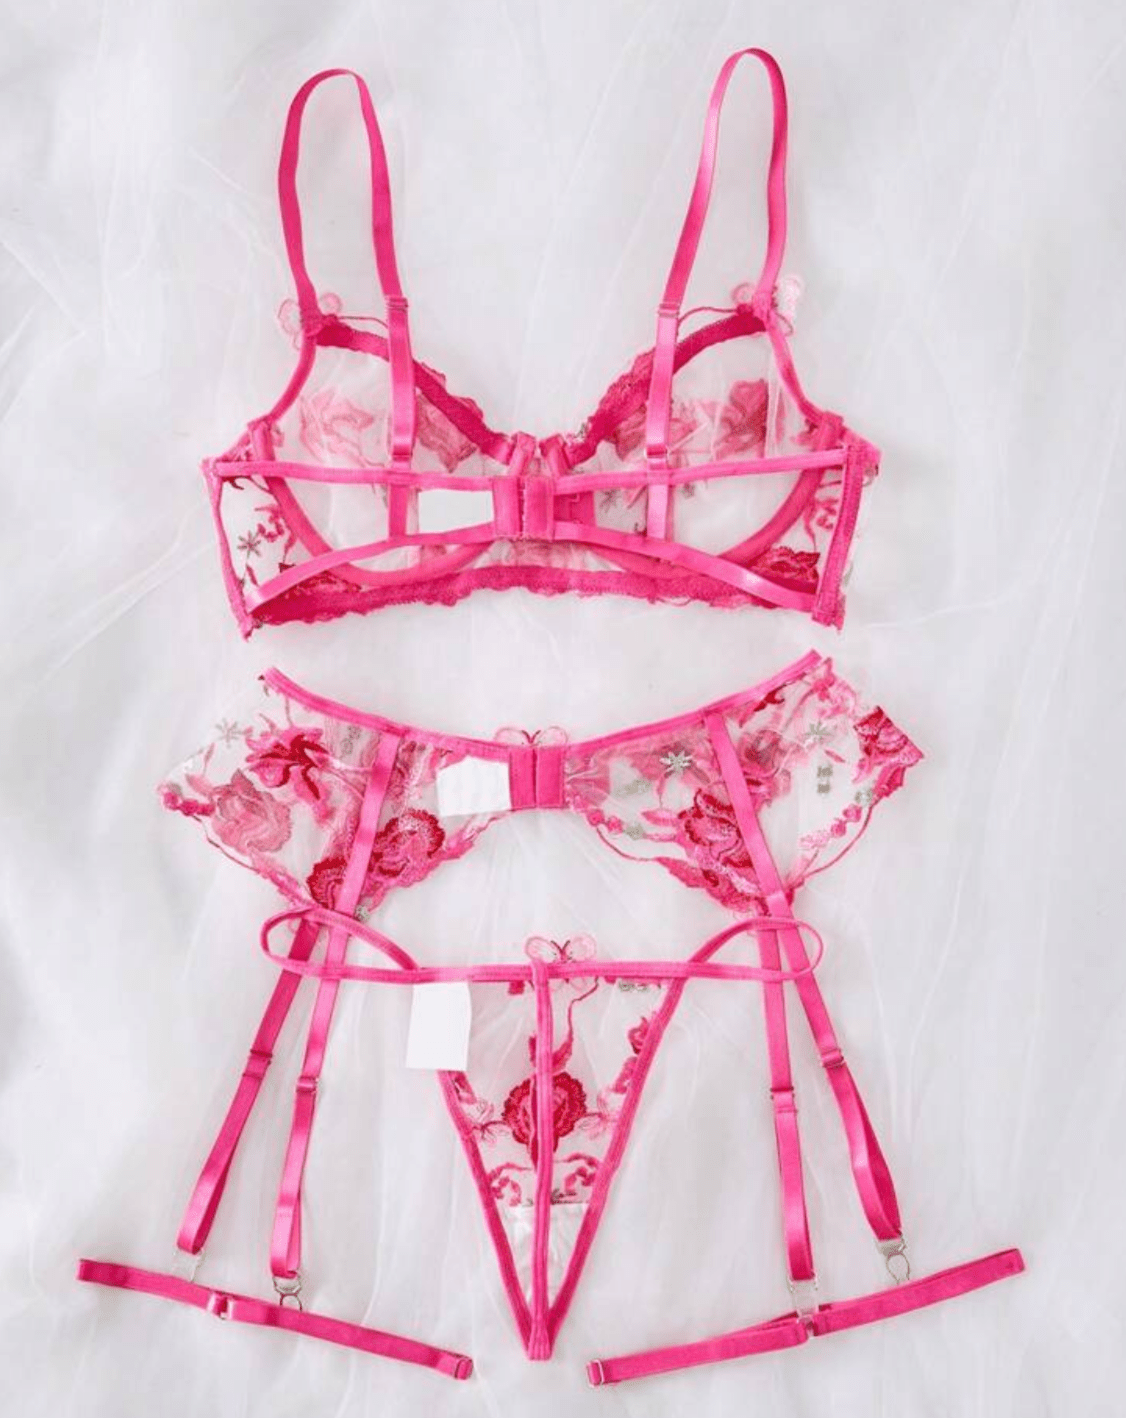 hot pink lingerie see through